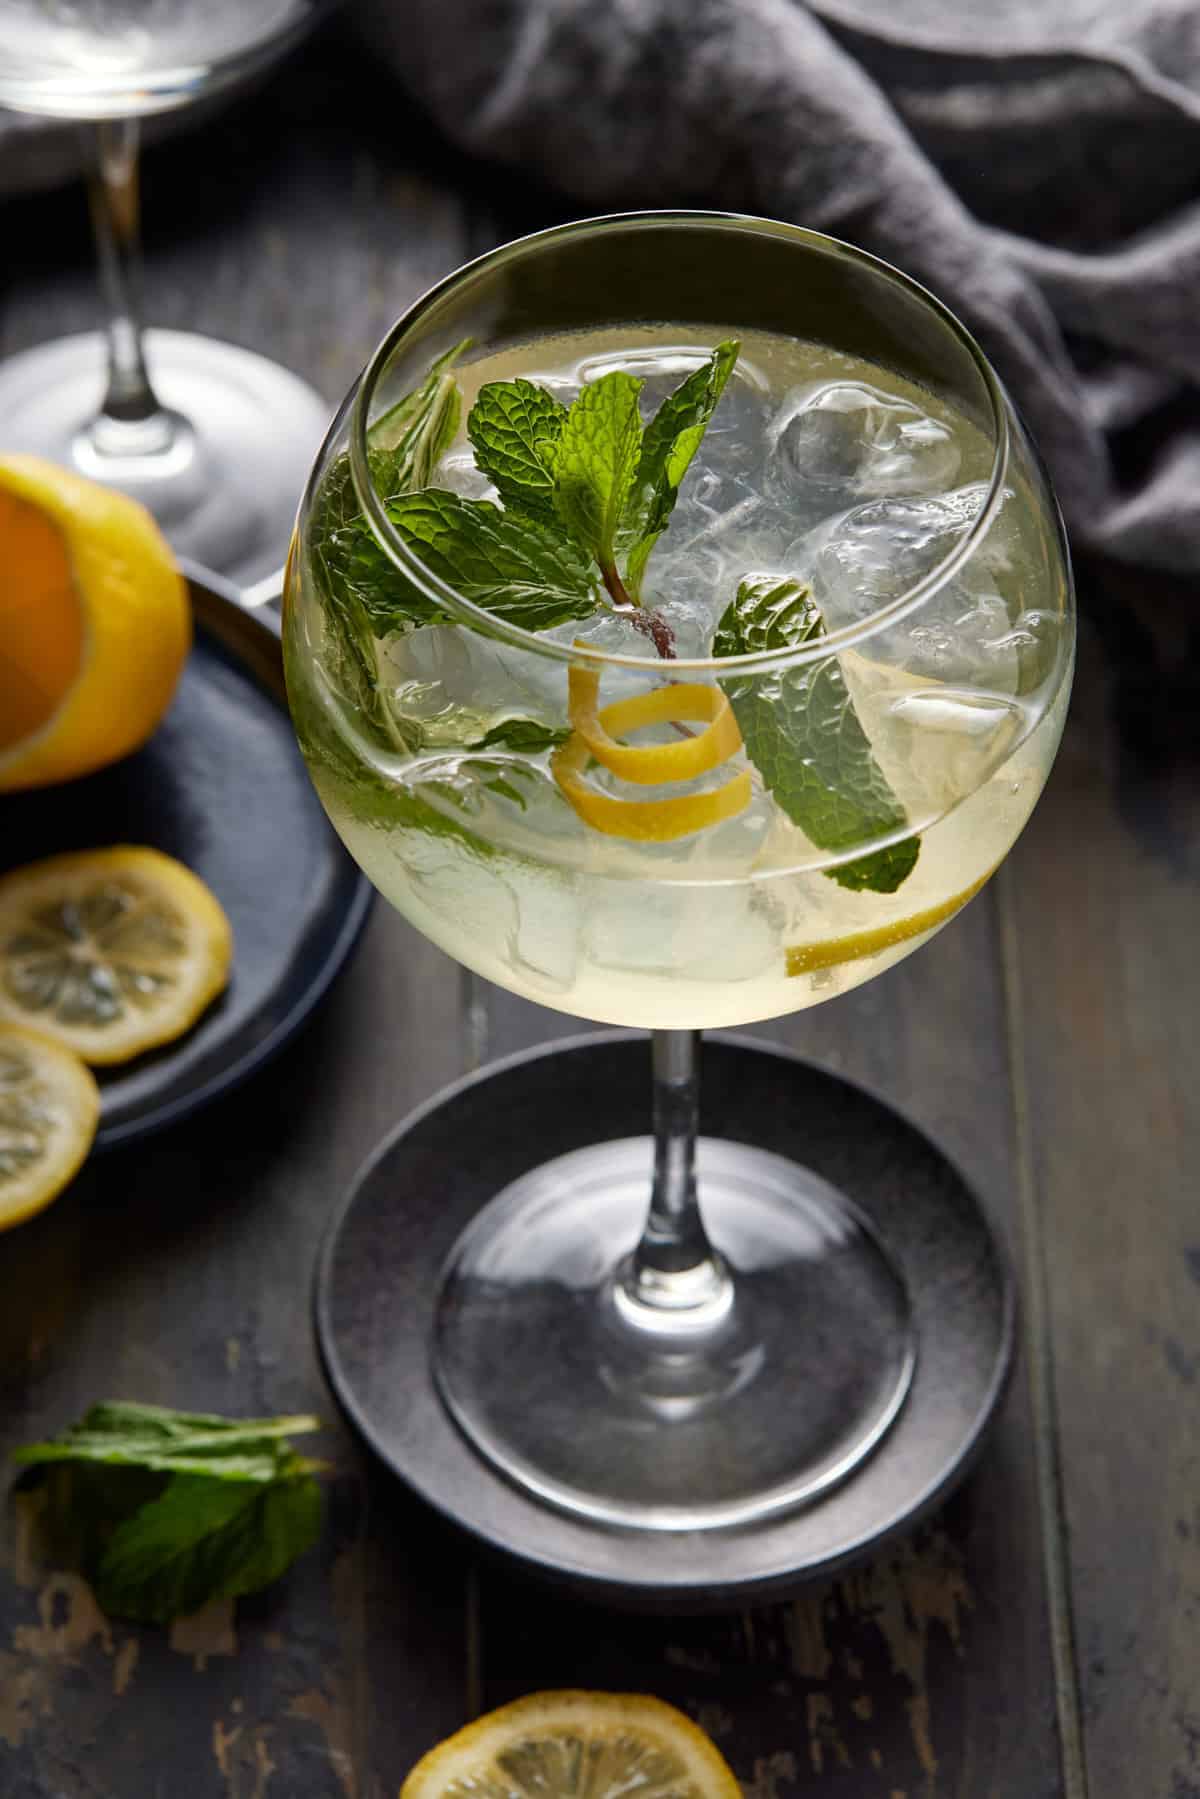 Hugo spritz cocktail in an ice-filled wine glass garnished with lemon and mint.